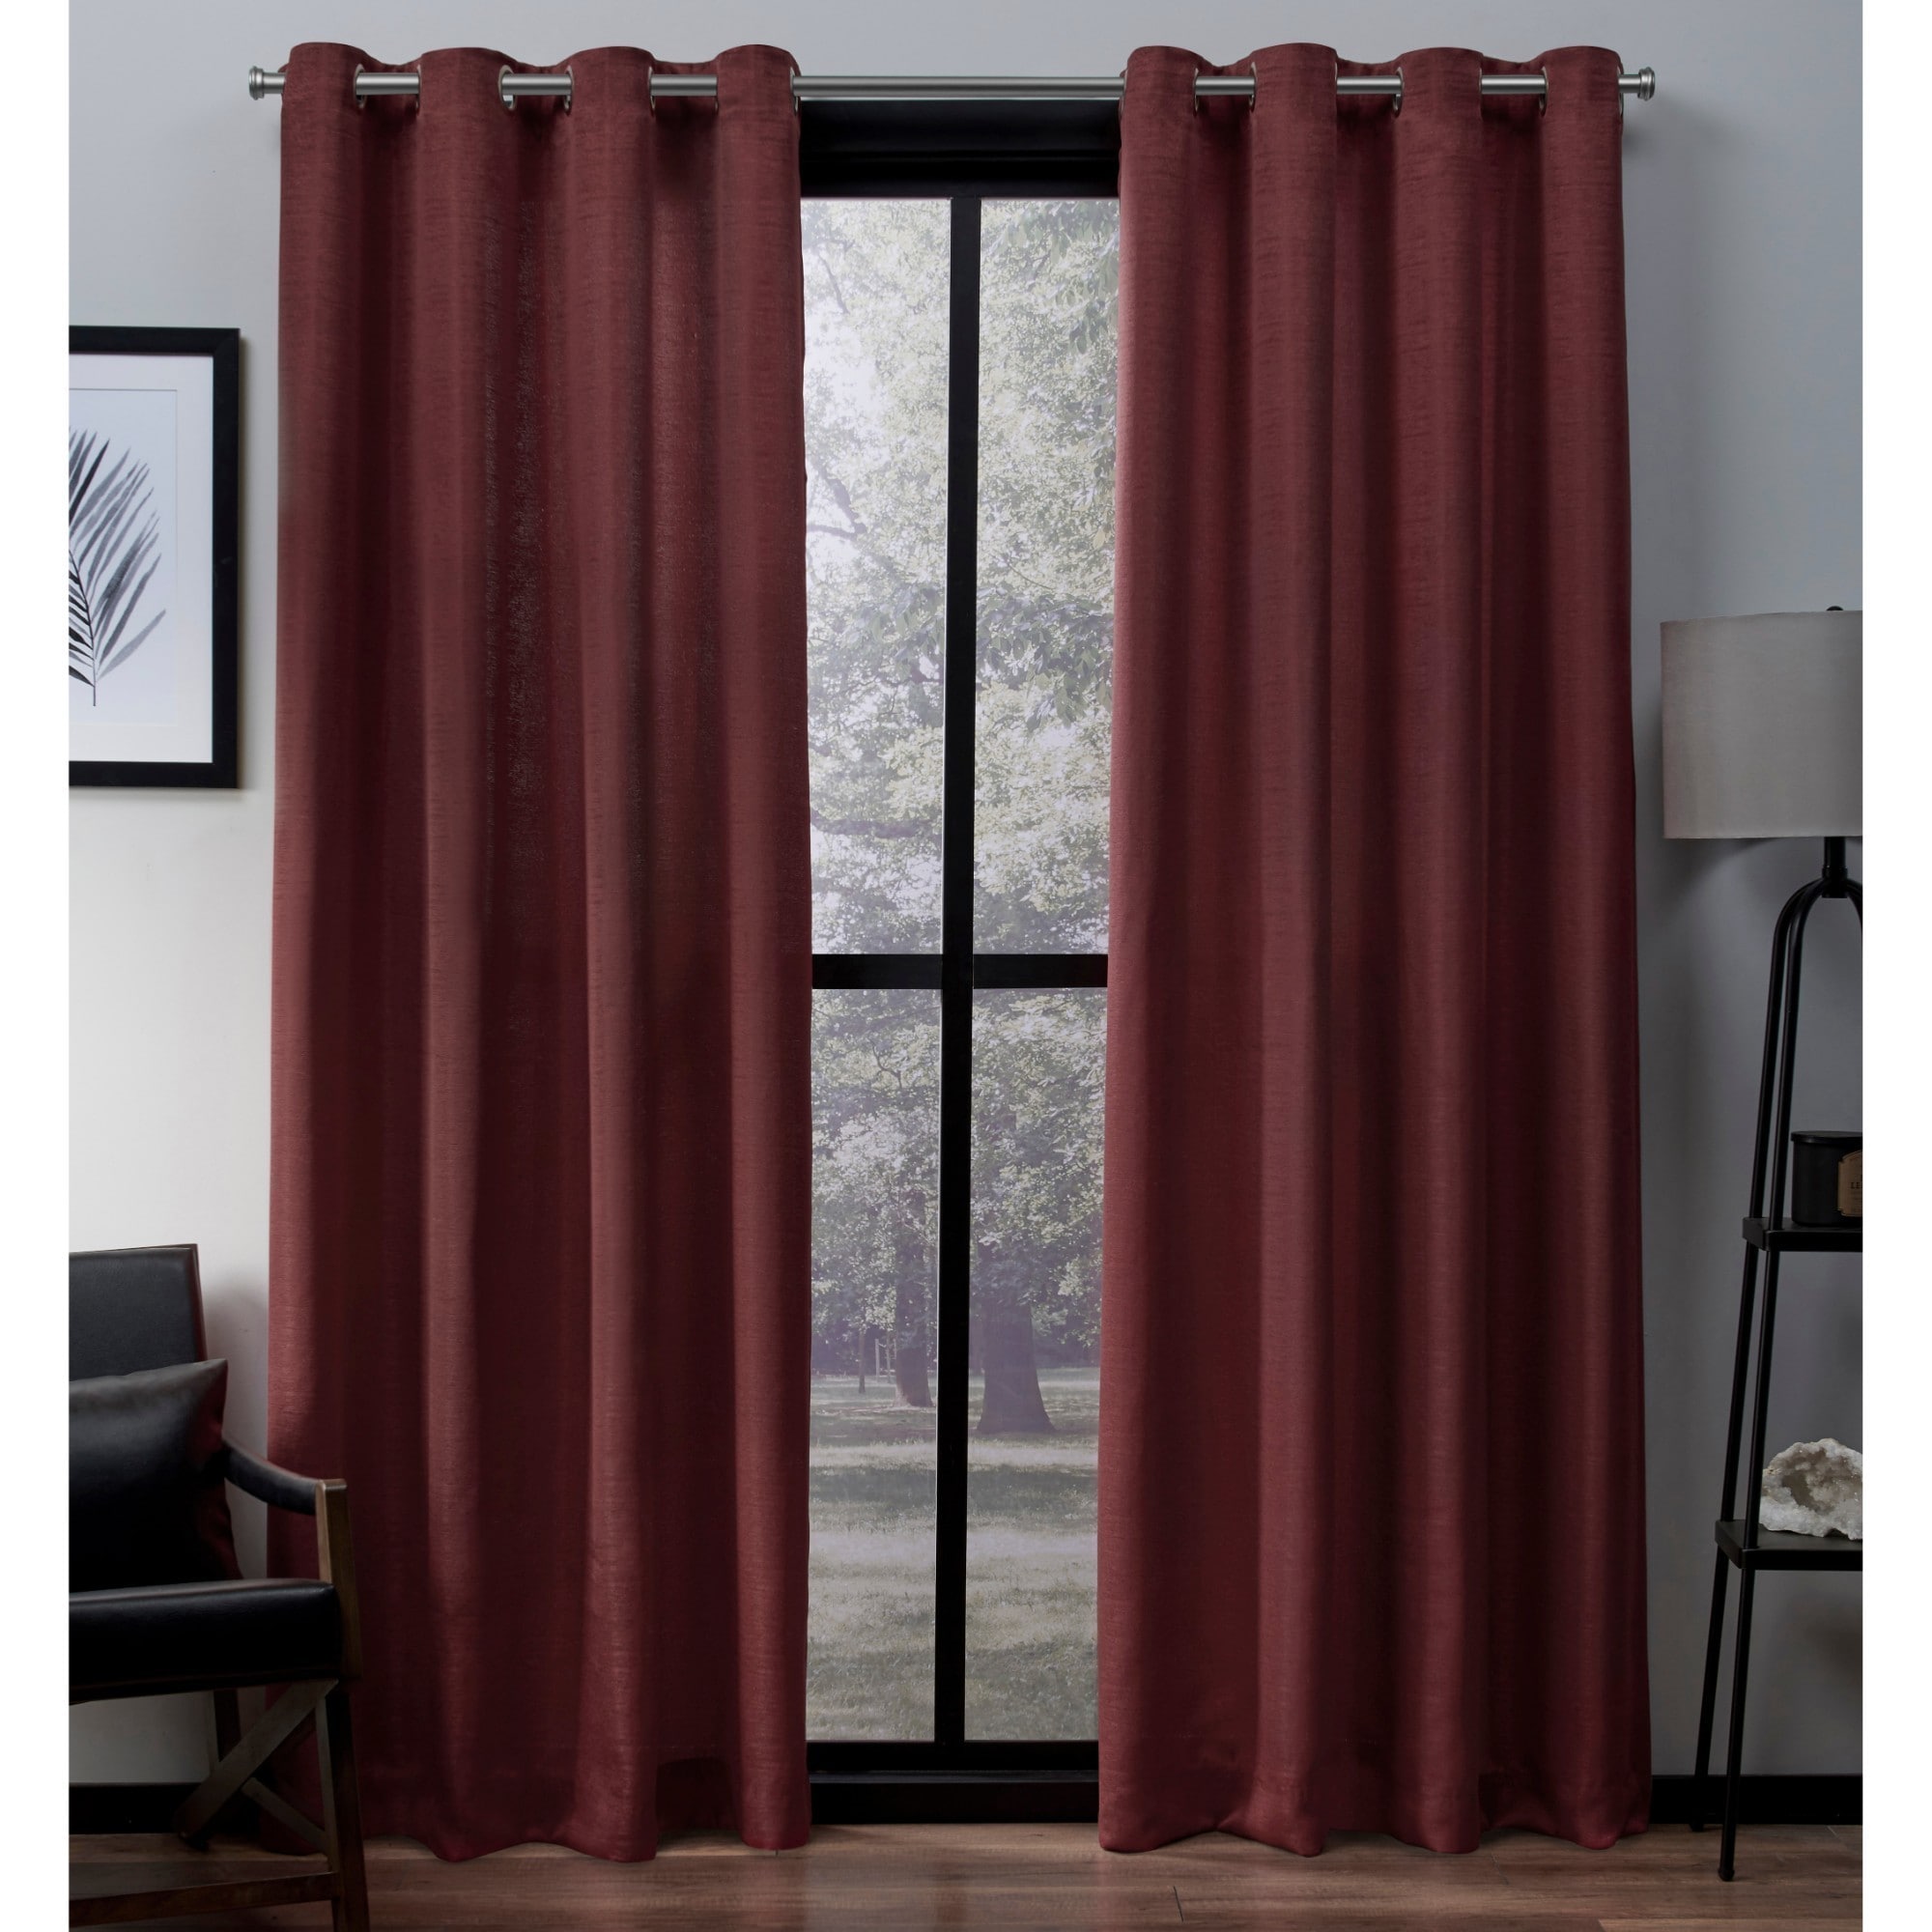 Eyelet Voile Curtain Panel Marrakesh Red 